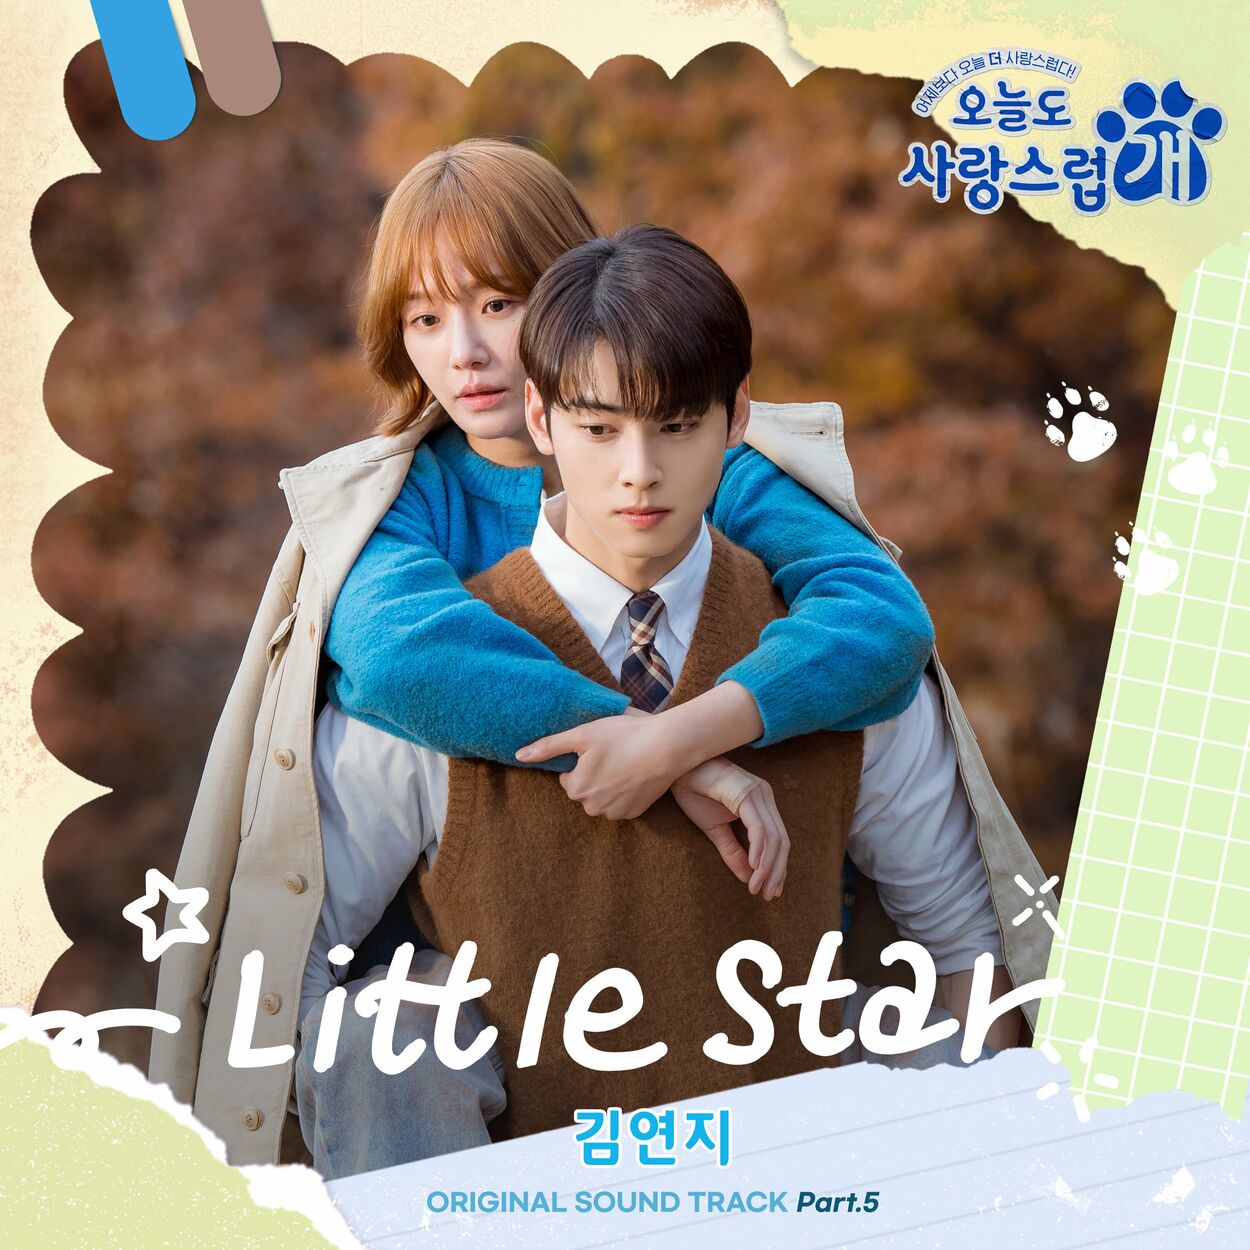 Kim Yeon Ji – Little Star (from “A Good Day to be a Dog” Original Television Sountrack, Pt. 5)